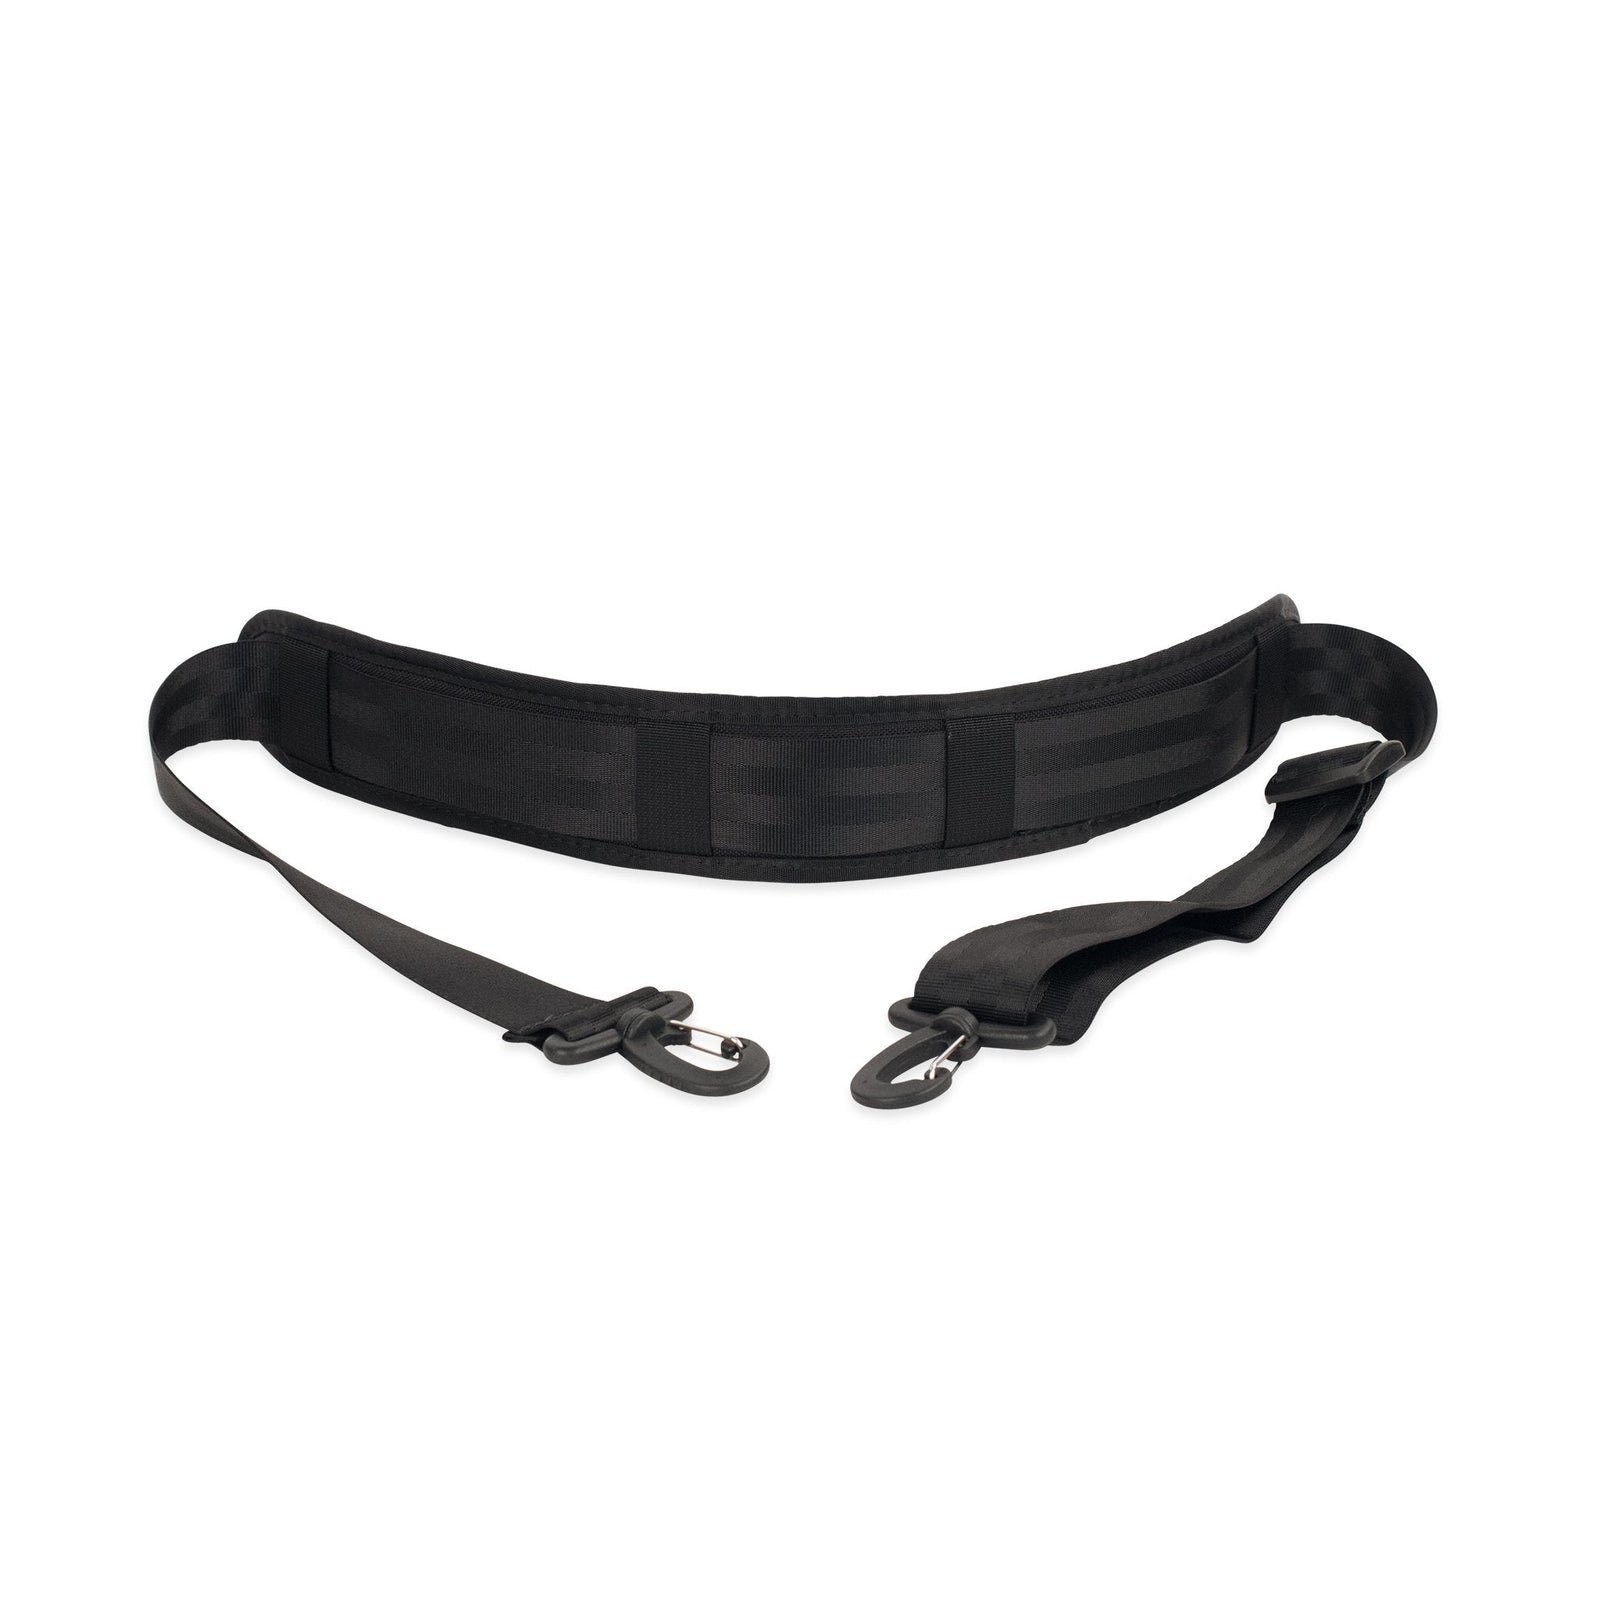 "Padded" shoulder strap with heavy duty plastic clips in "Black".